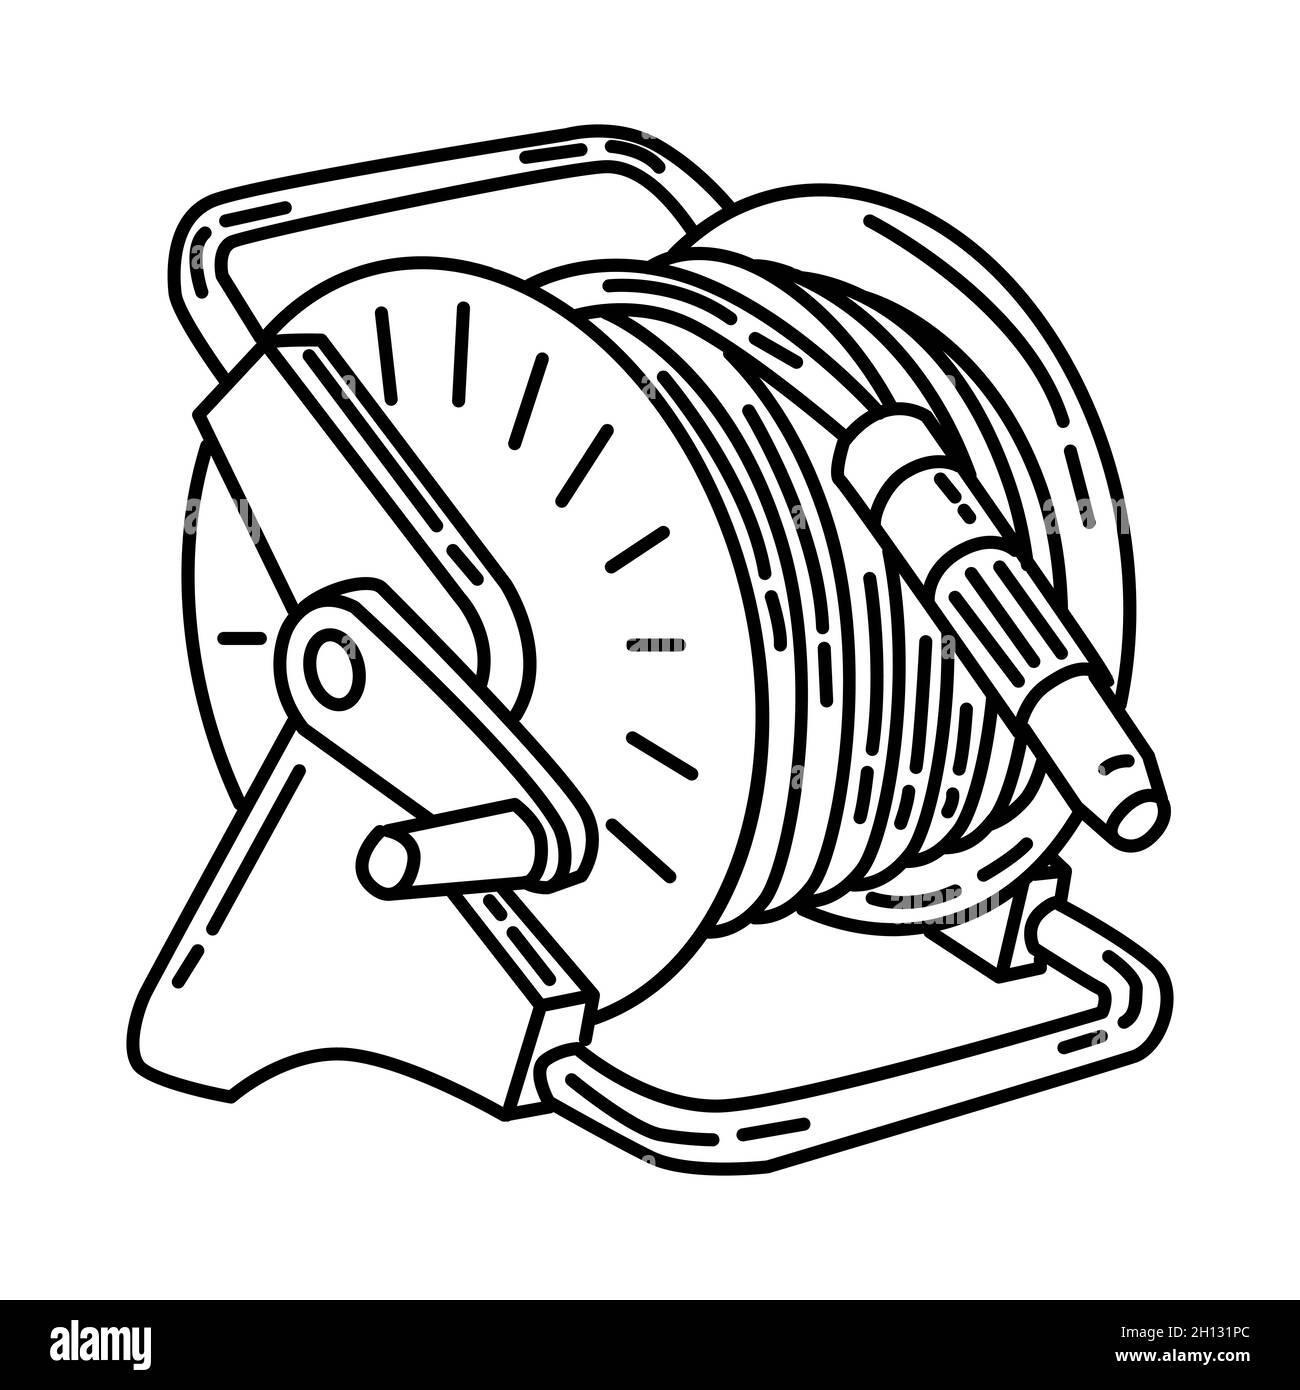 Use of fire hose reel Black and White Stock Photos & Images - Alamy